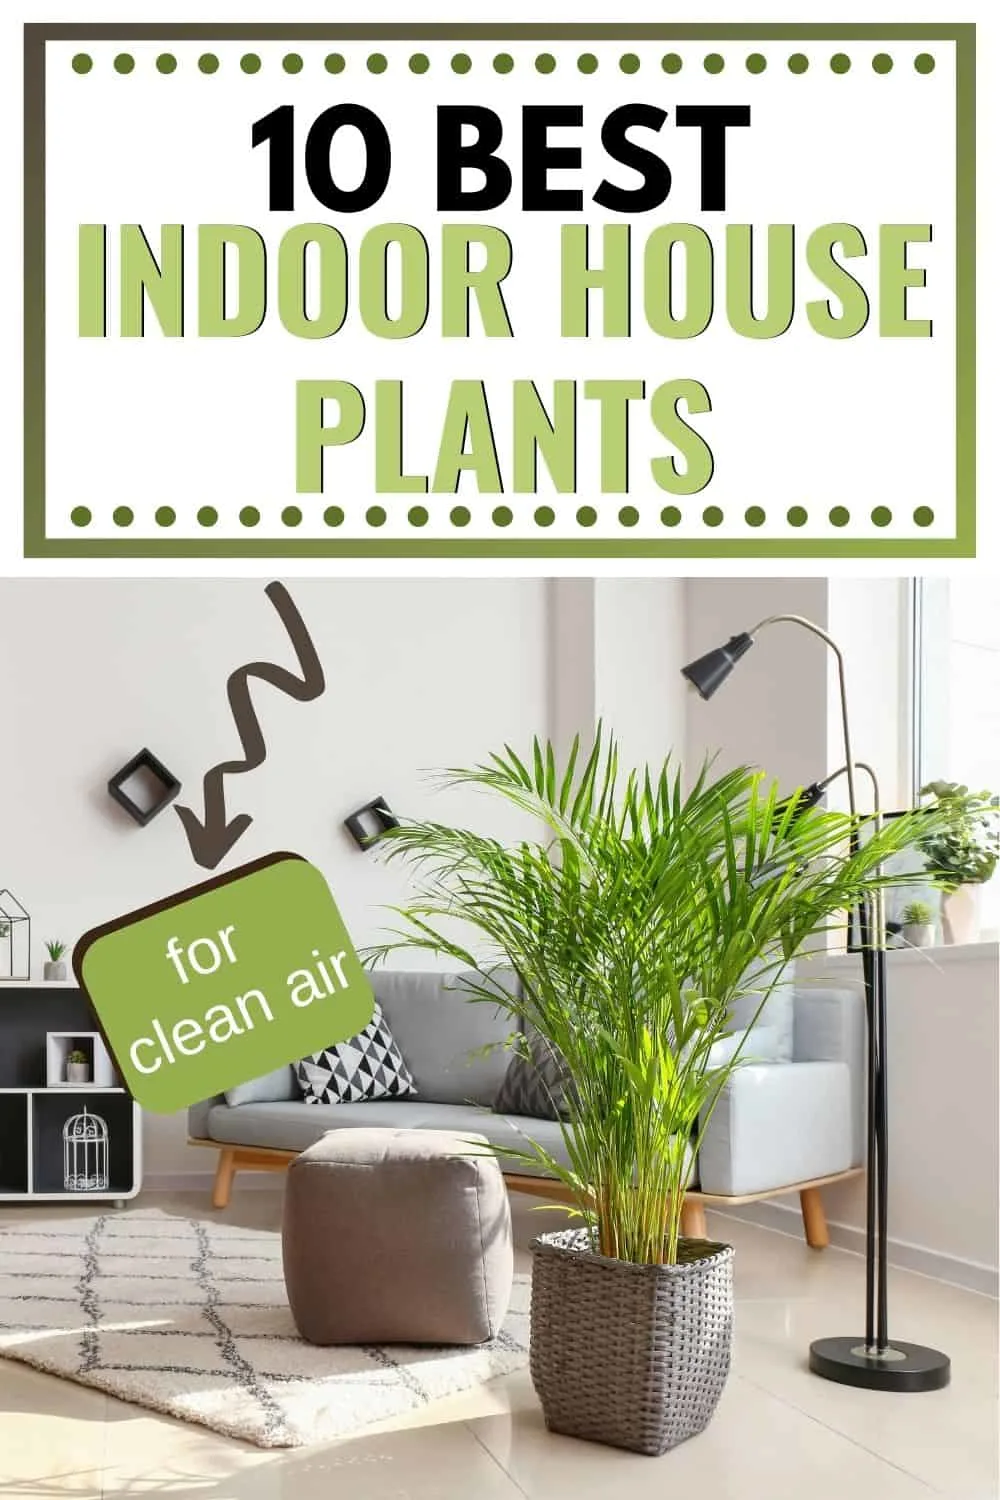 10 best indoor house plants for clean air